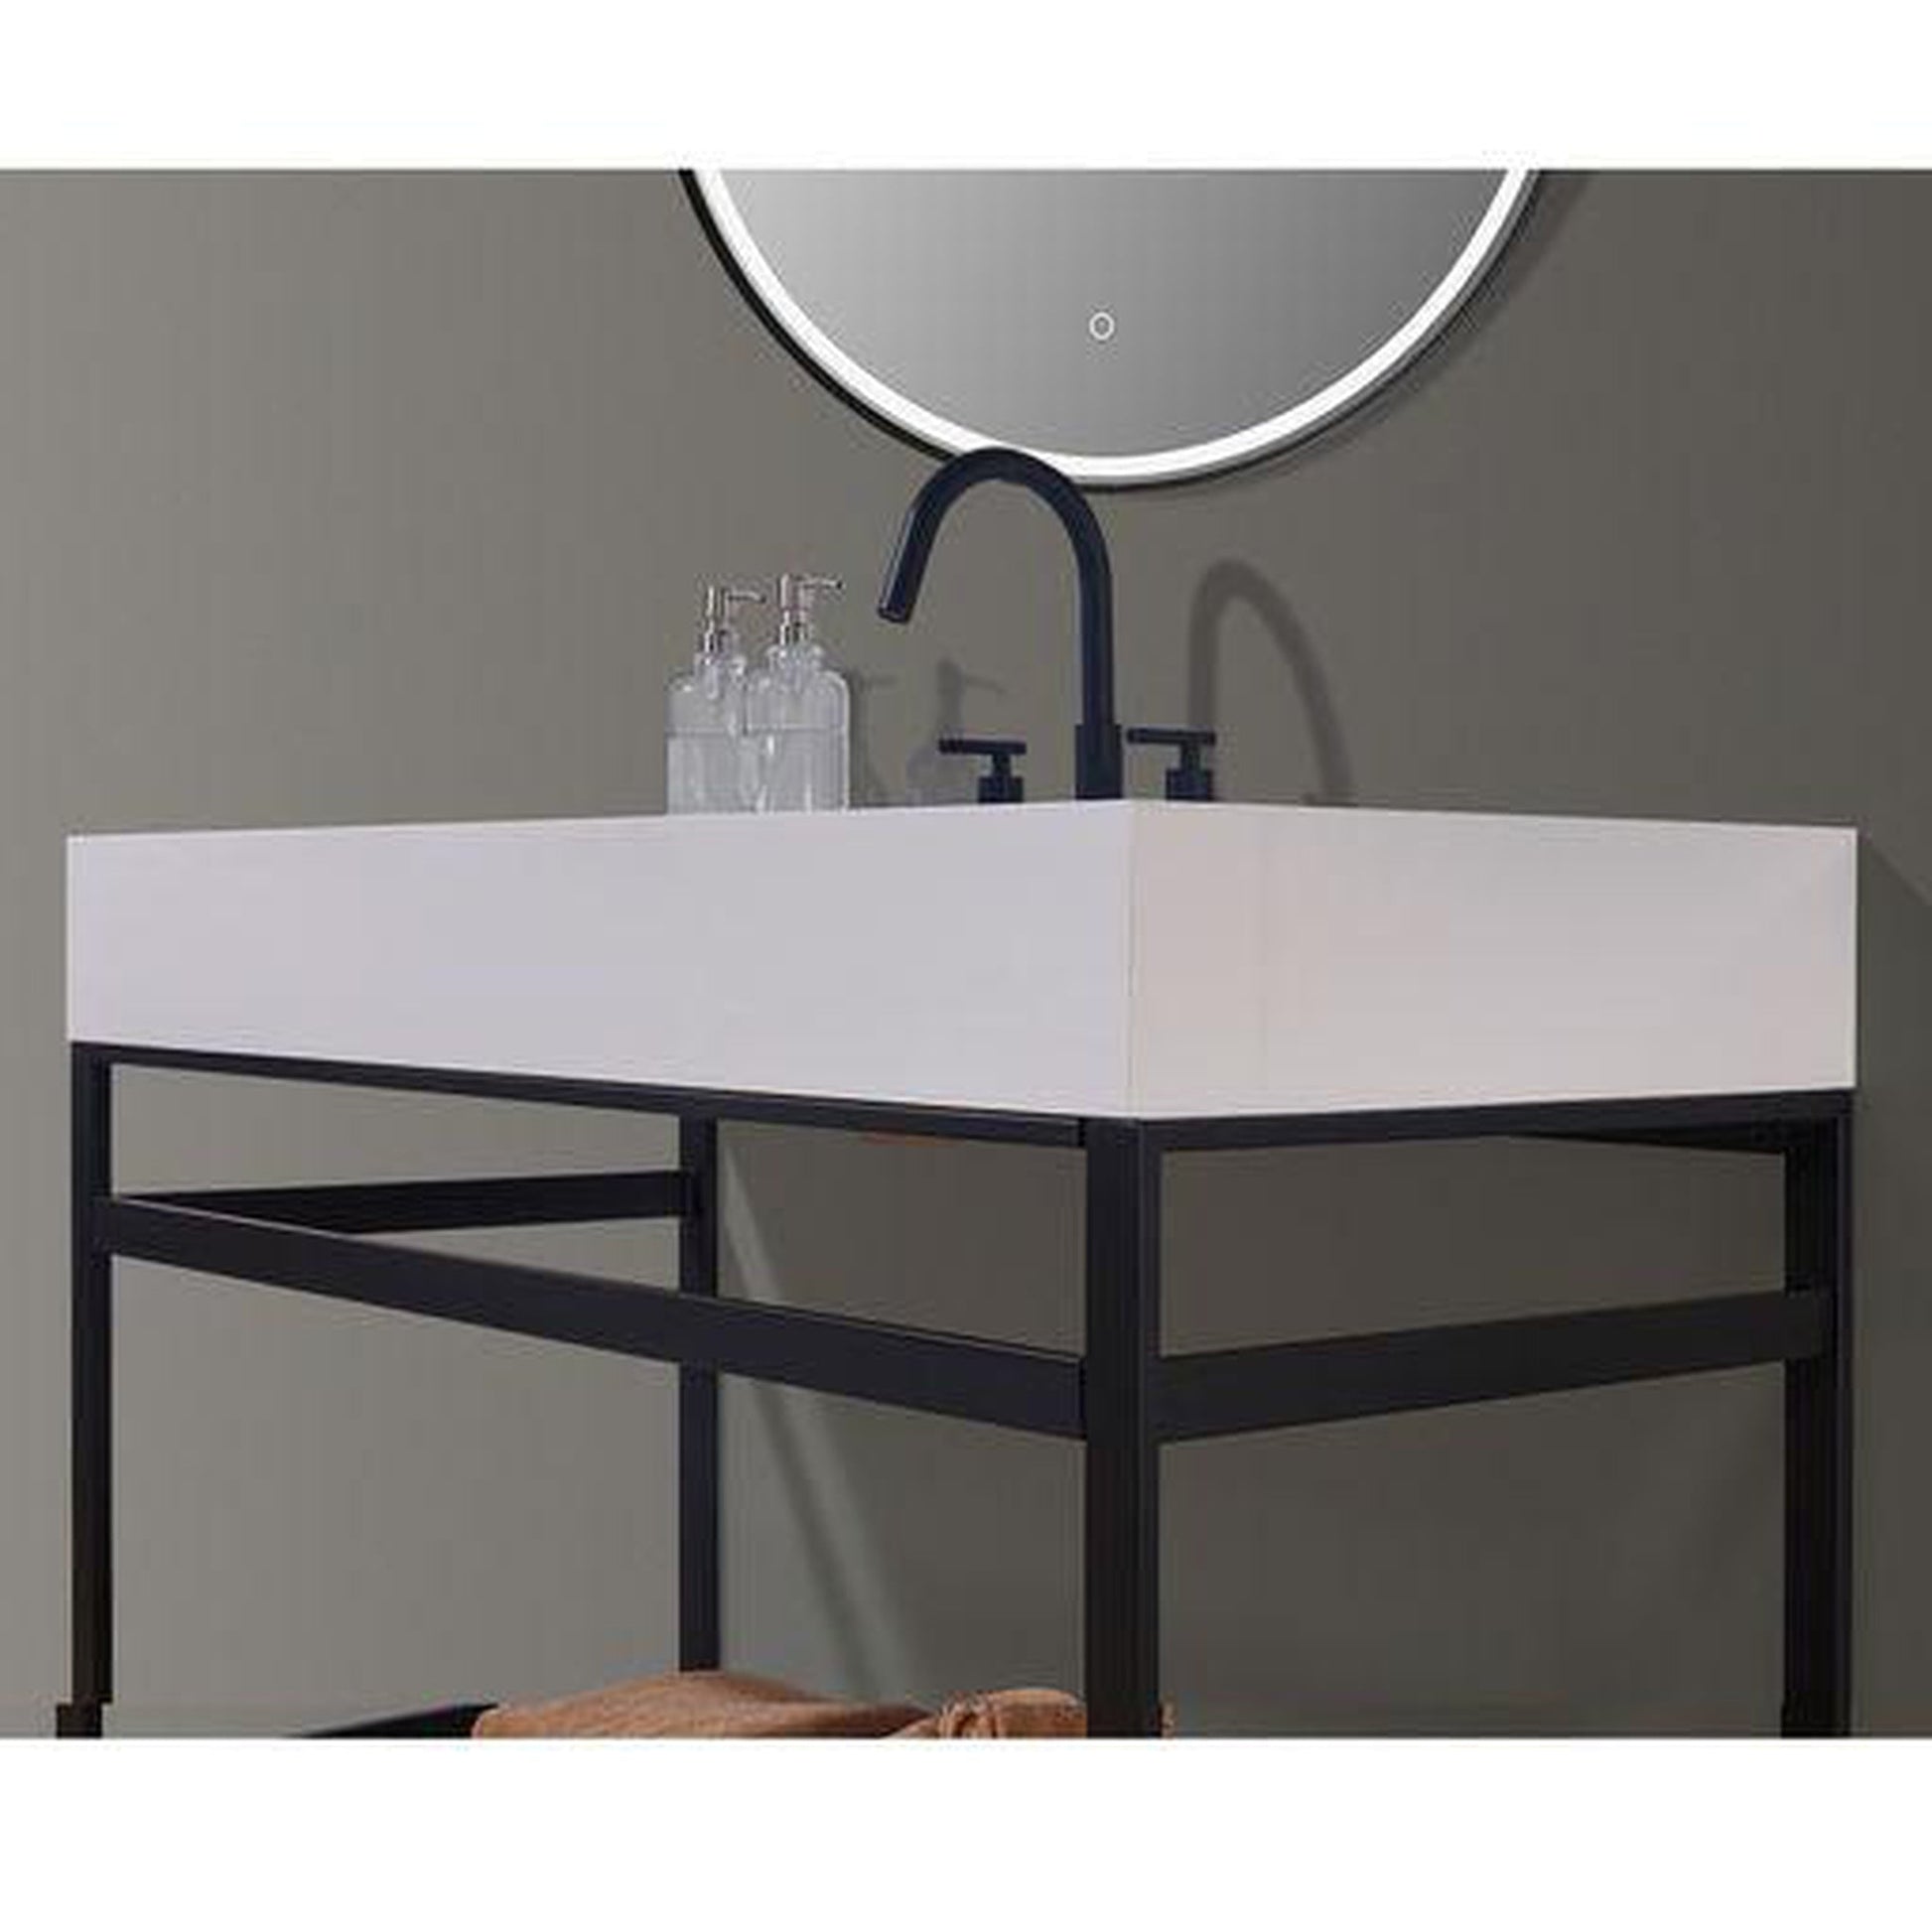 Altair Edolo 48" Matte Black Single Stainless Steel Bathroom Vanity Set Console With Mirror, Snow White Stone Top, Single Rectangular Undermount Ceramic Sink, and Safety Overflow Hole